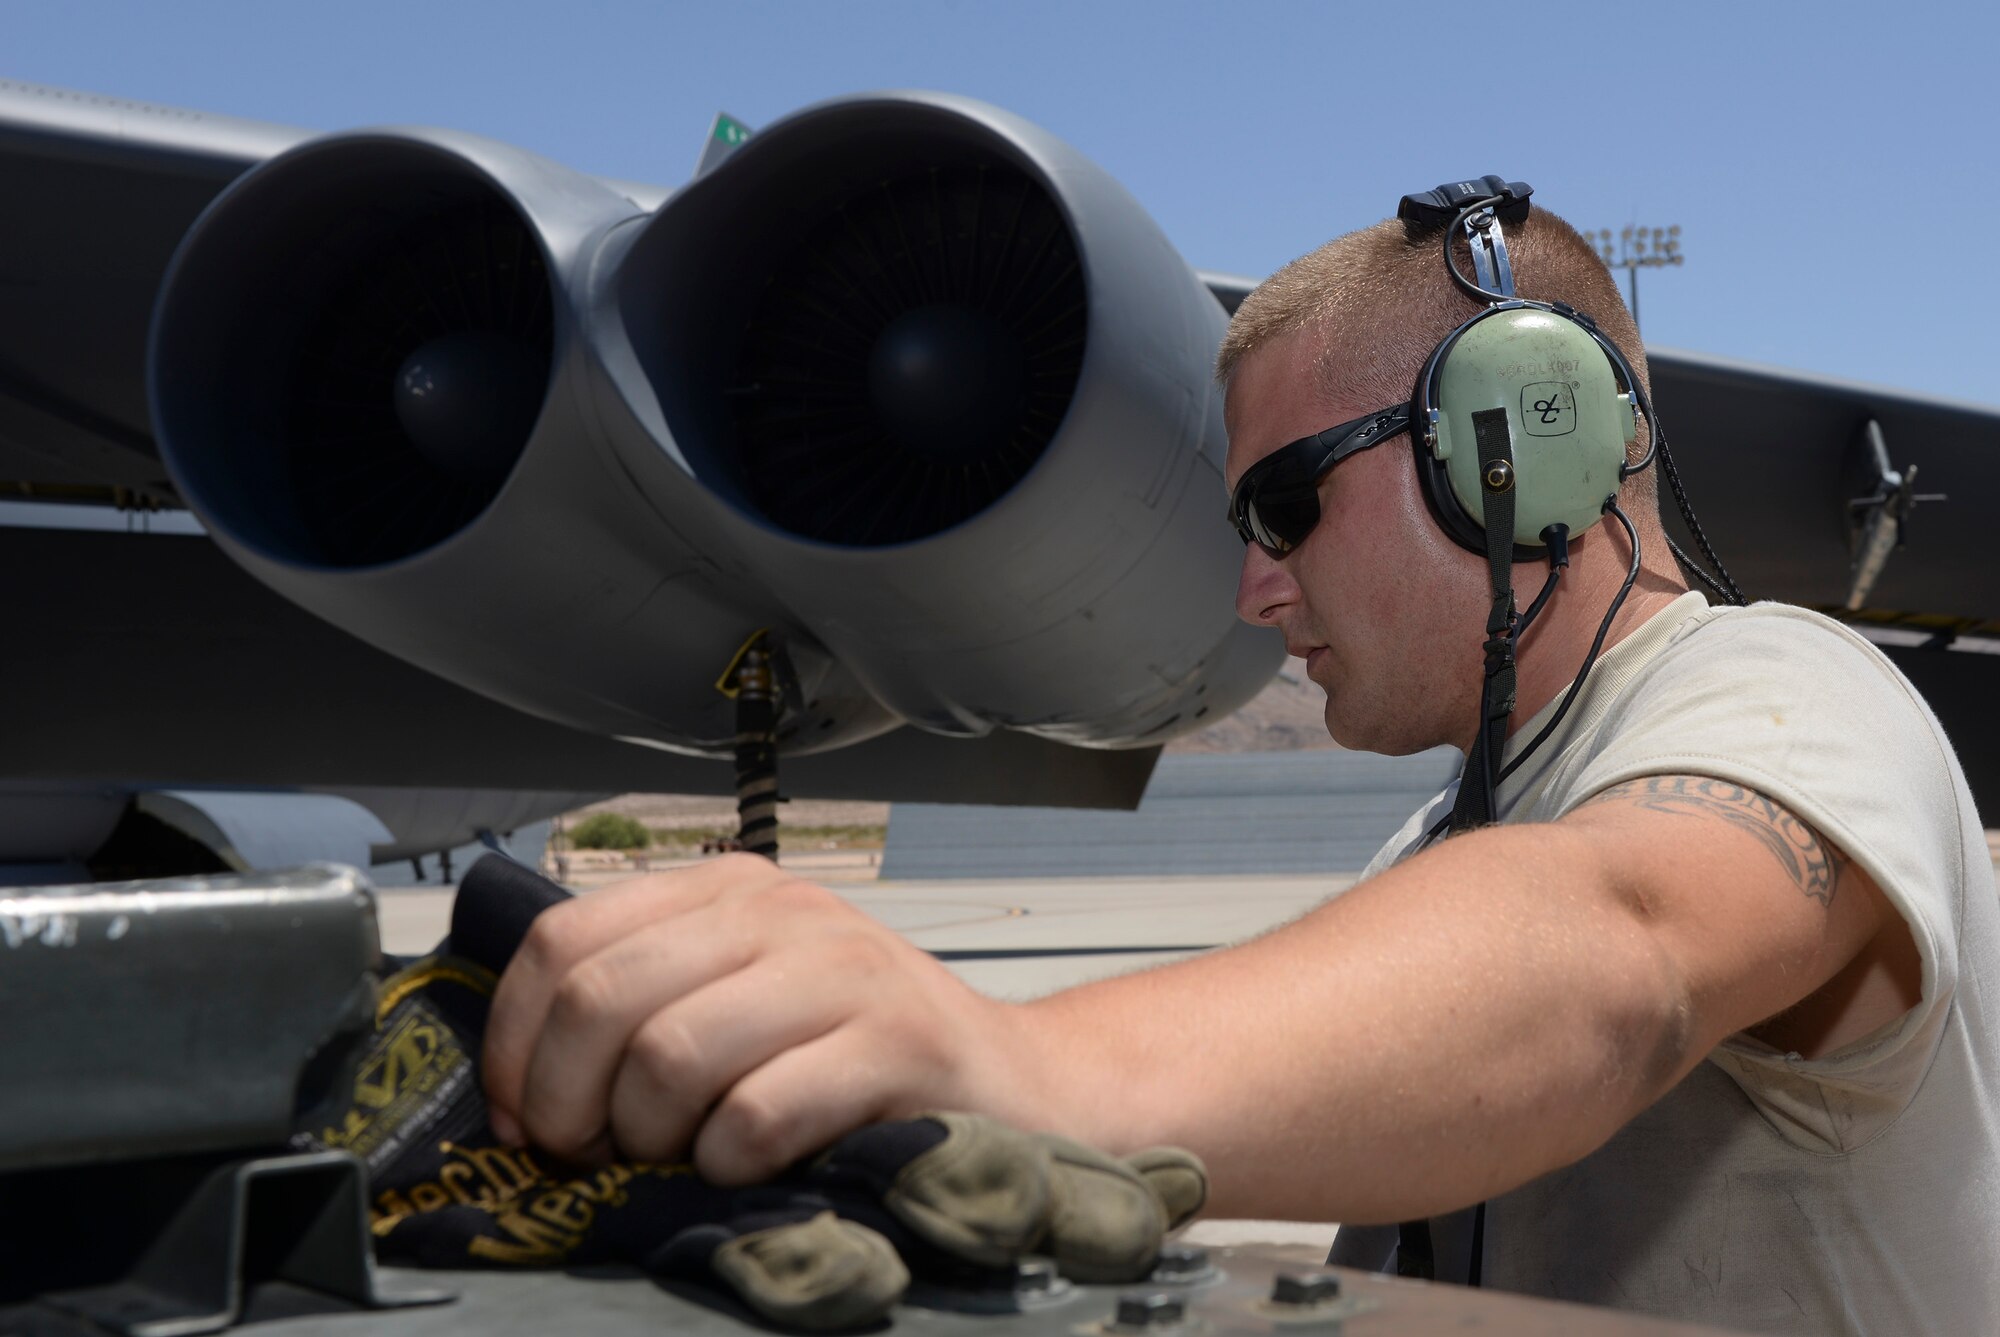 Senior Airman Elias Sapp, 96th Bomb Squadron crew chief, prepares a B-52 Stratofortress for takeoff during Red Flag 16-3 at Nellis Air Force Base, Nev., July 18, 2016. Red Flag provides an opportunity for the 96th BS aircrew and maintainers the ability to hone their tactical skillsets in a challenging environment. (U.S. Air Force photo by Senior Airman Kristin High/Released)